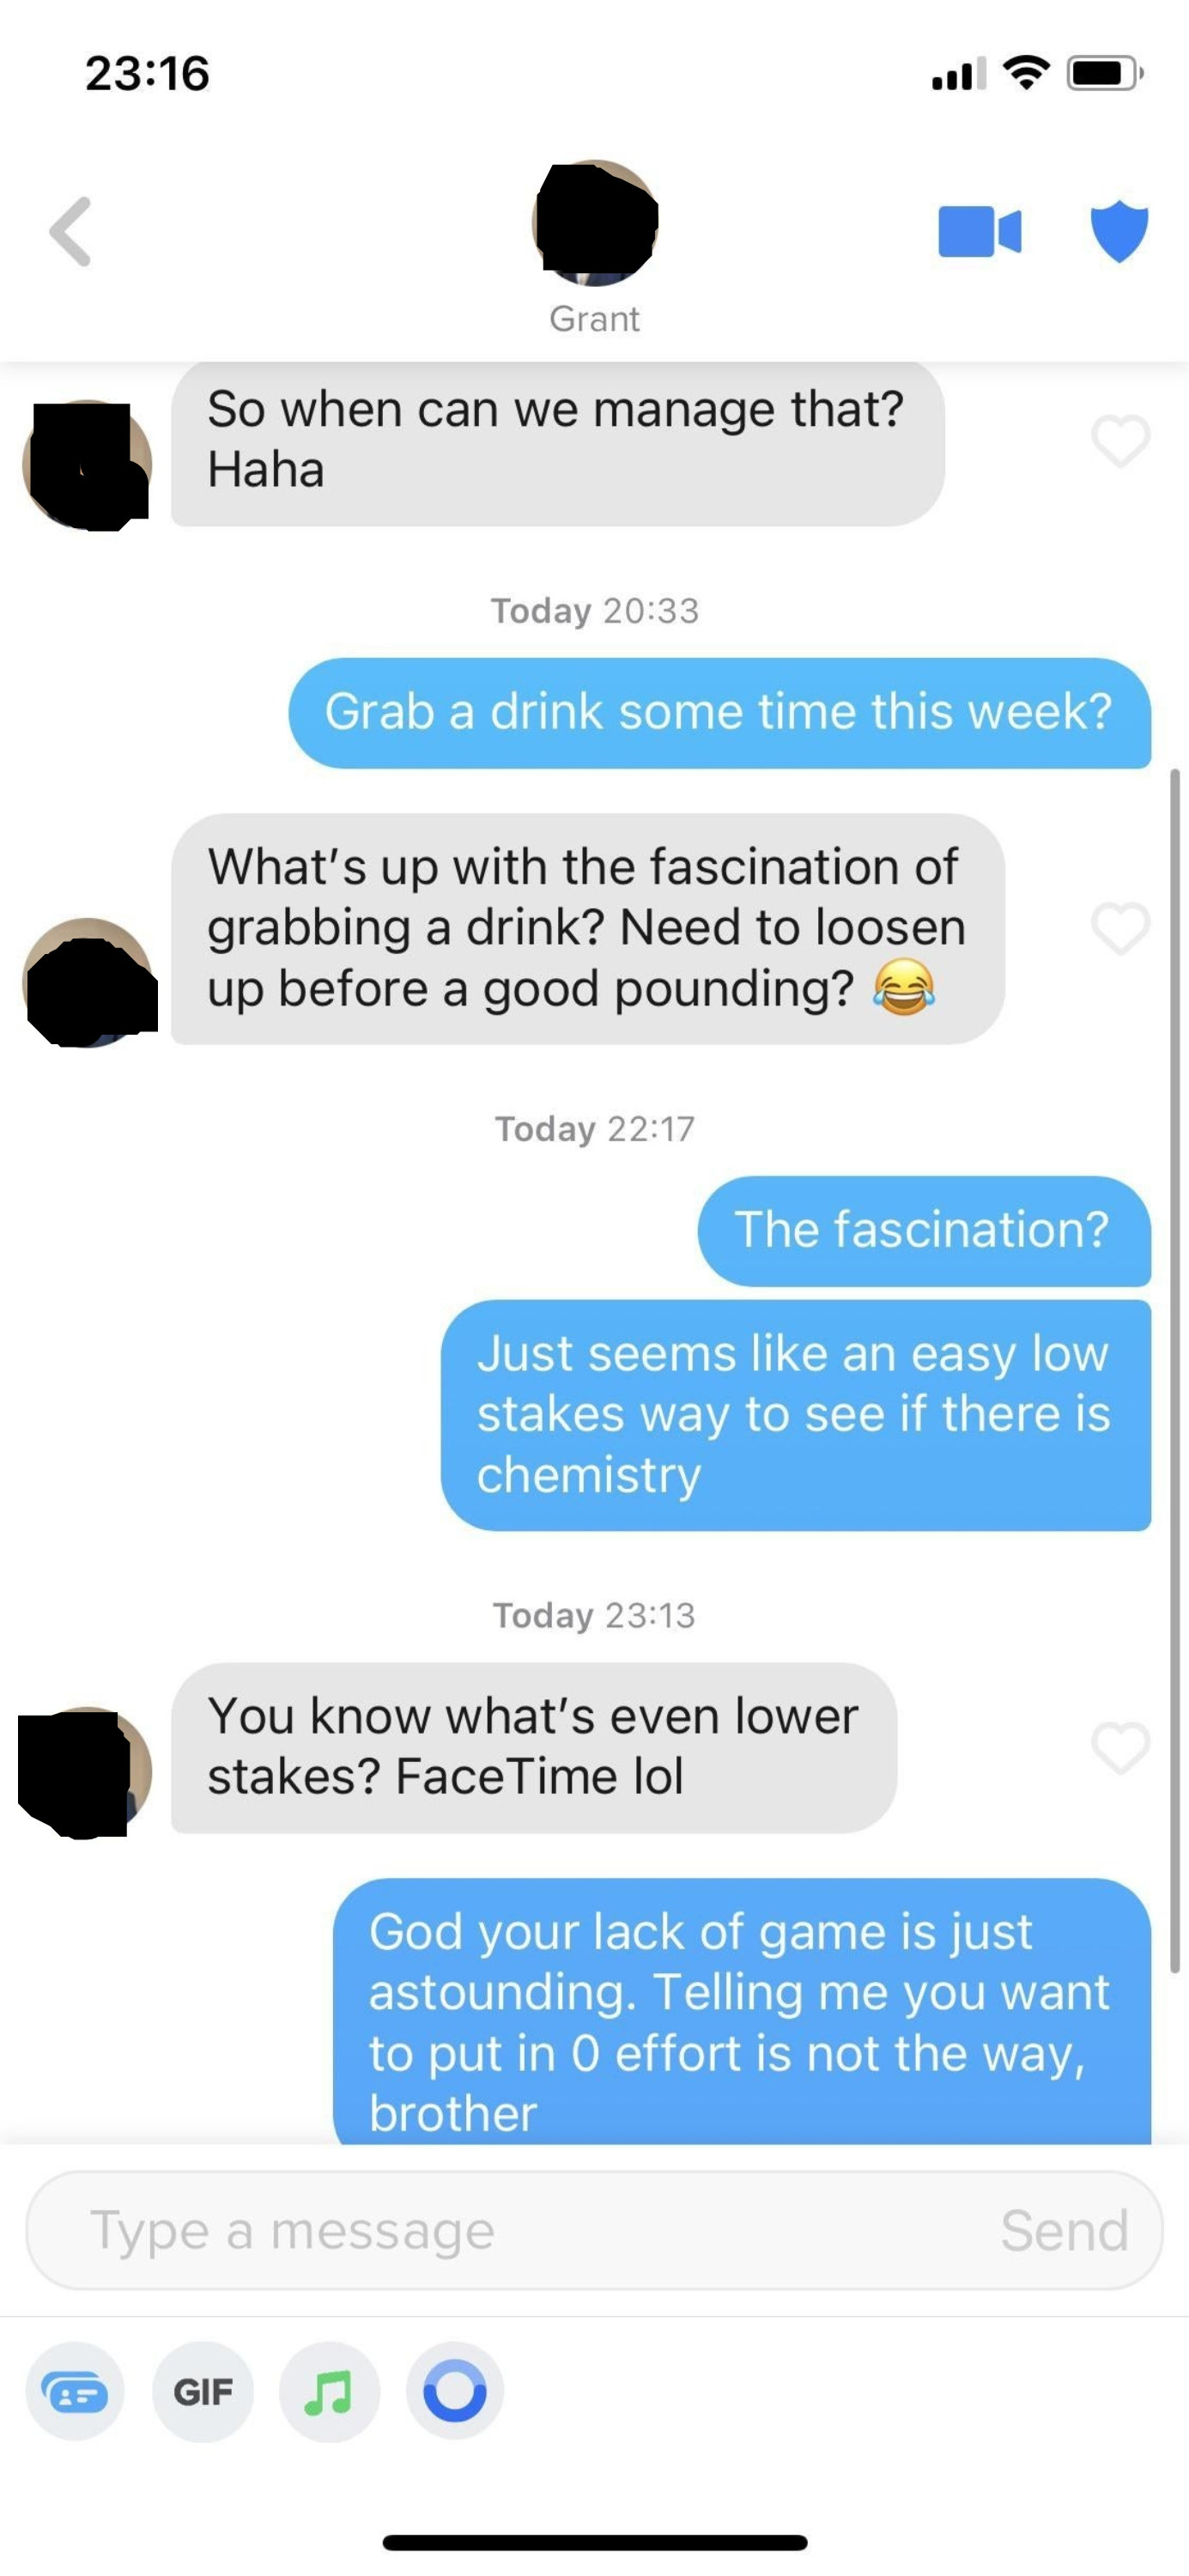 someone saying that facetime is an even lower stakes way of seeing if there is chemistry than going out for drinks